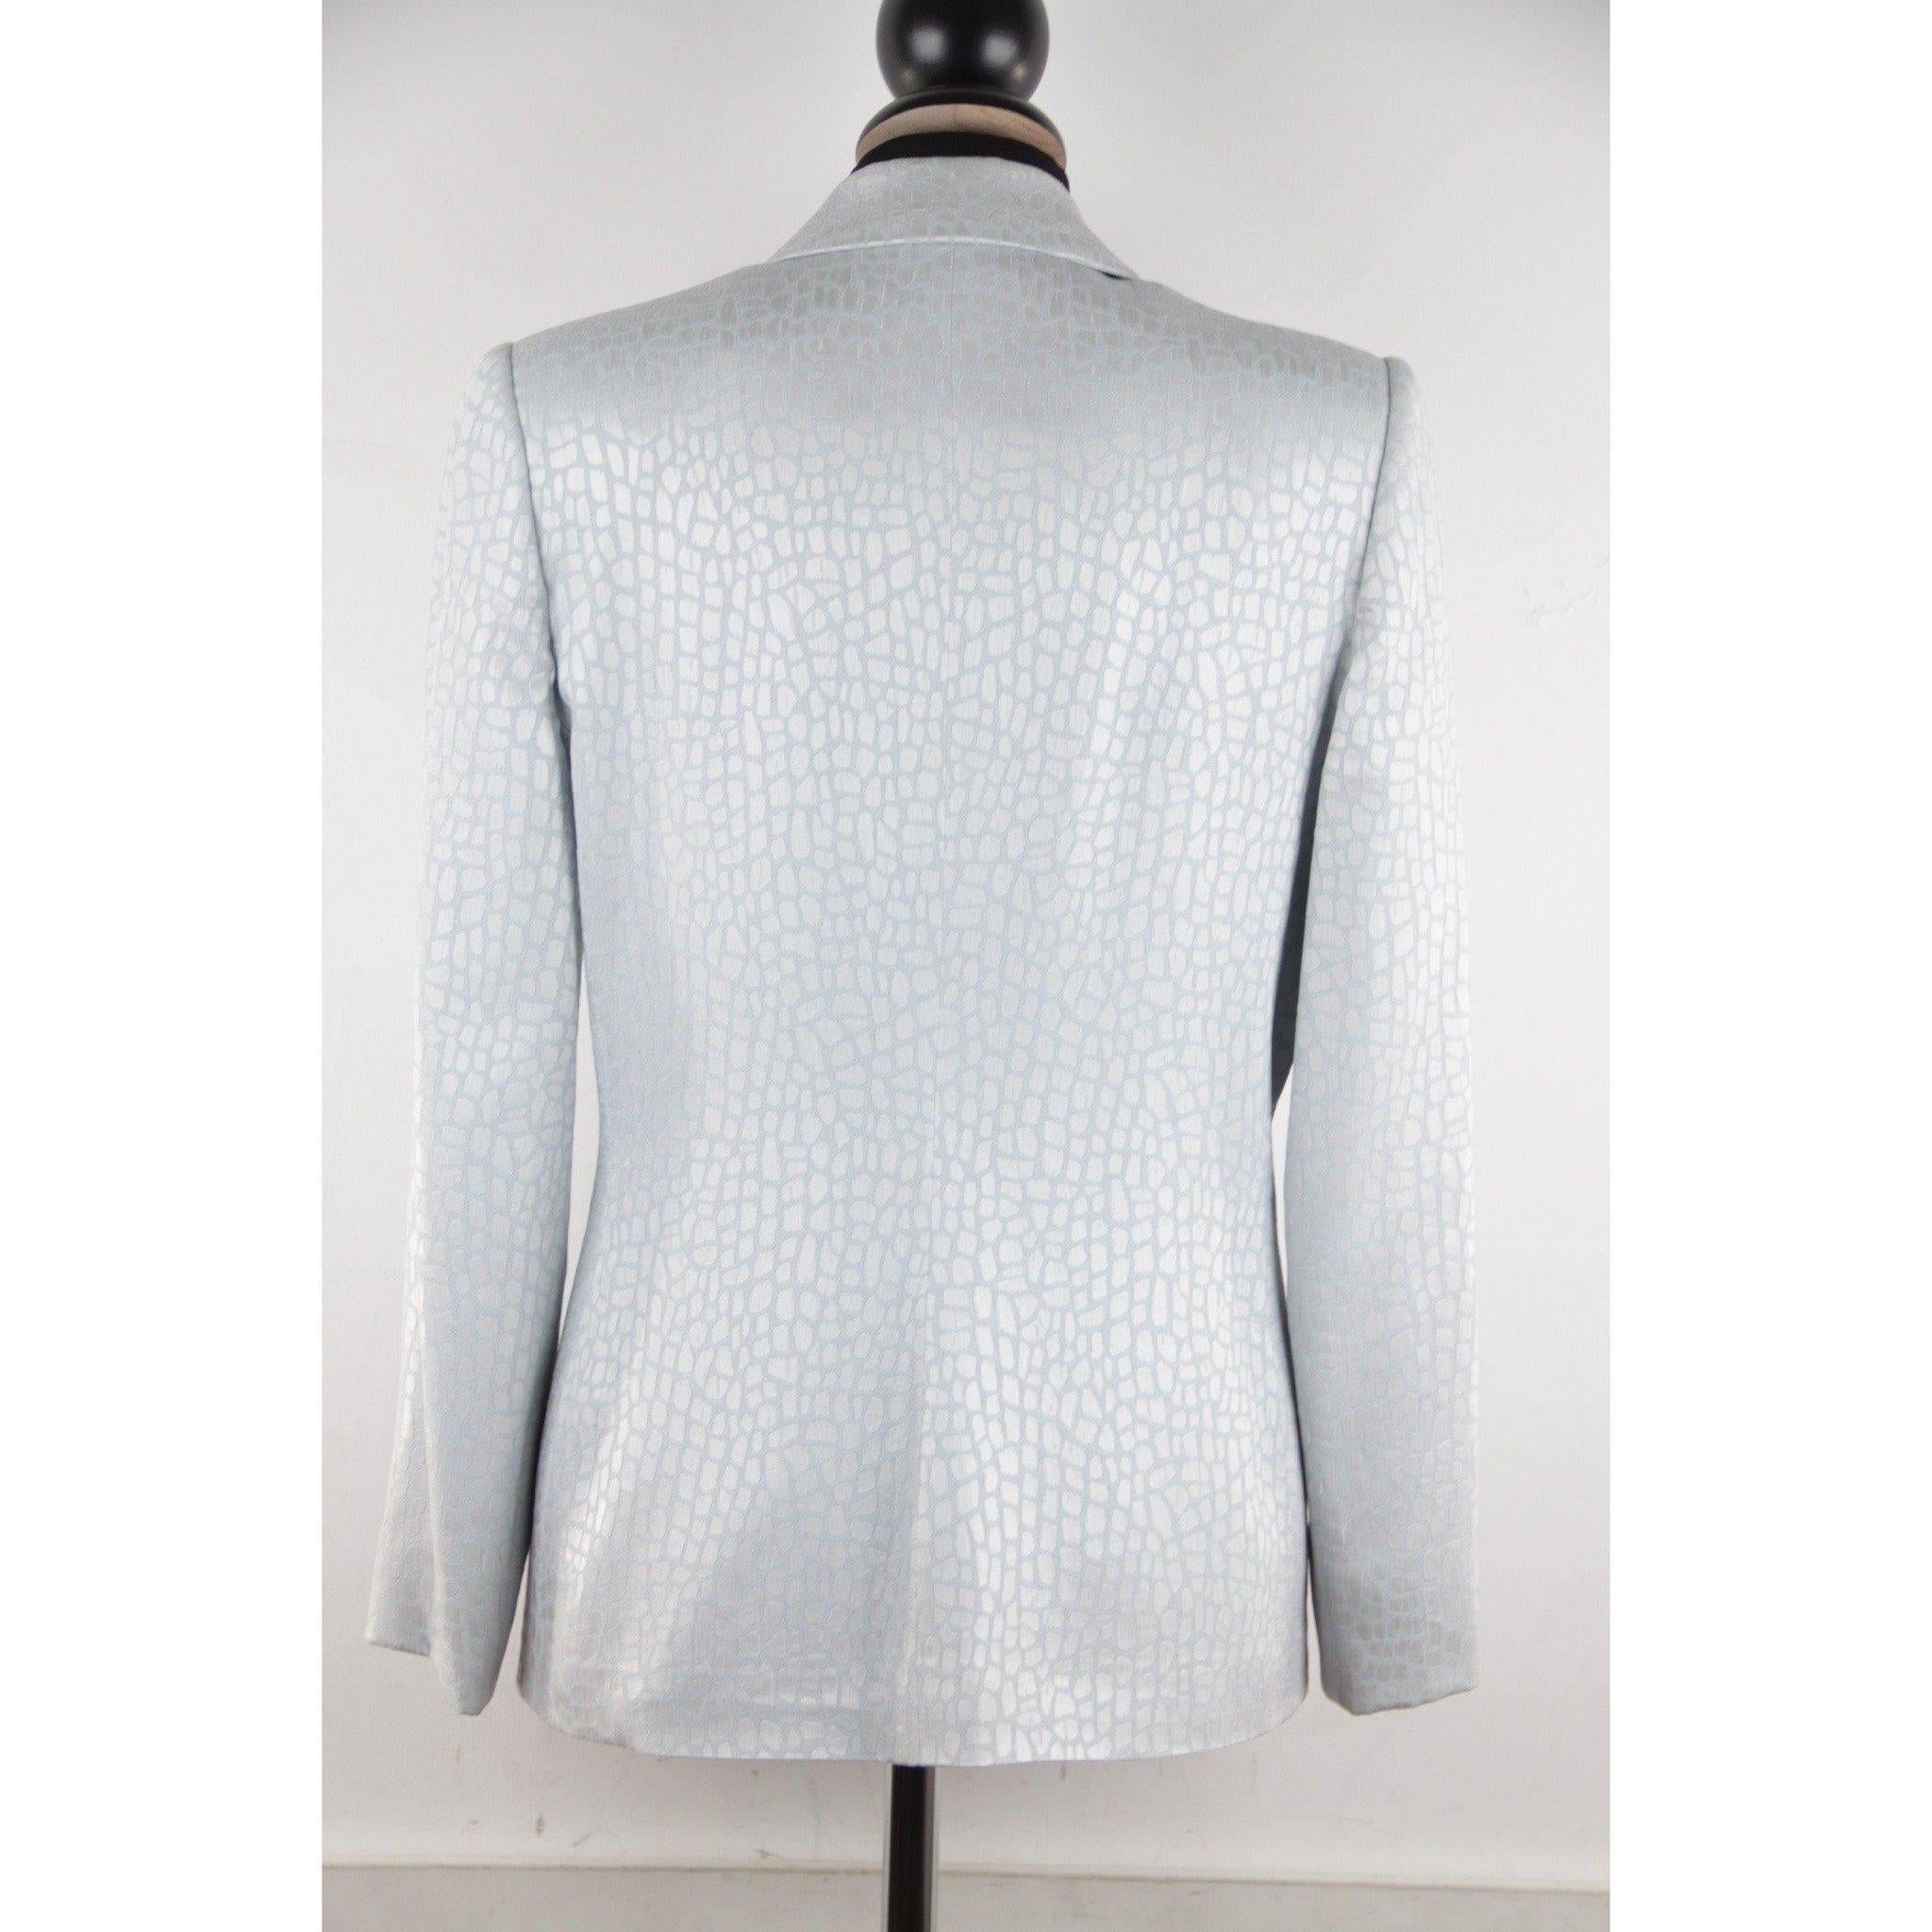 GAI MATTIOLO Baby Blue CROC LOOK Double Breasted BLAZER Jacket SZ 42 IT GT In Excellent Condition In Rome, Rome